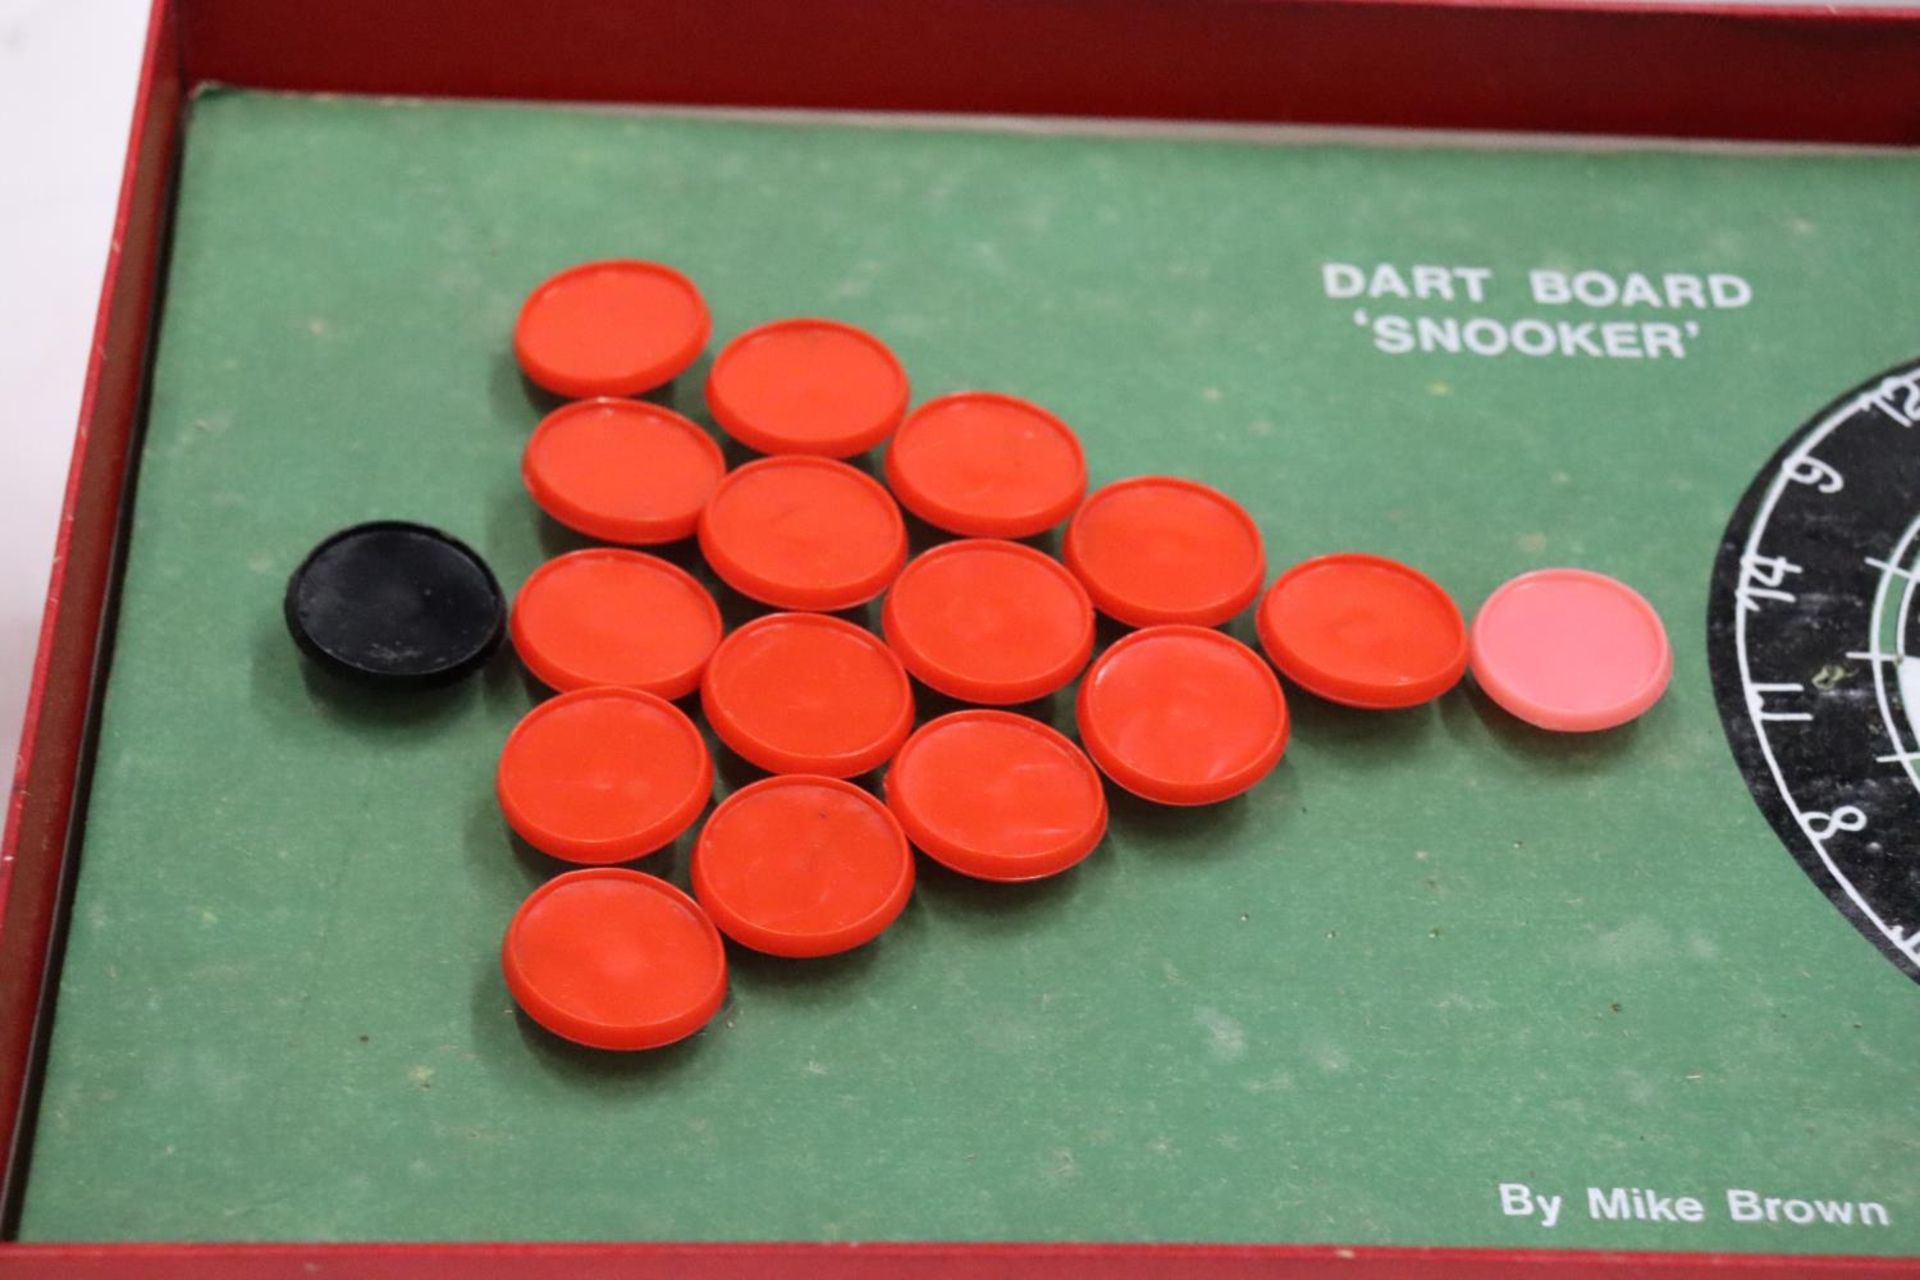 A RARE VINTAGE BOXED DART BOARD SNOOKER GAME - Image 3 of 6